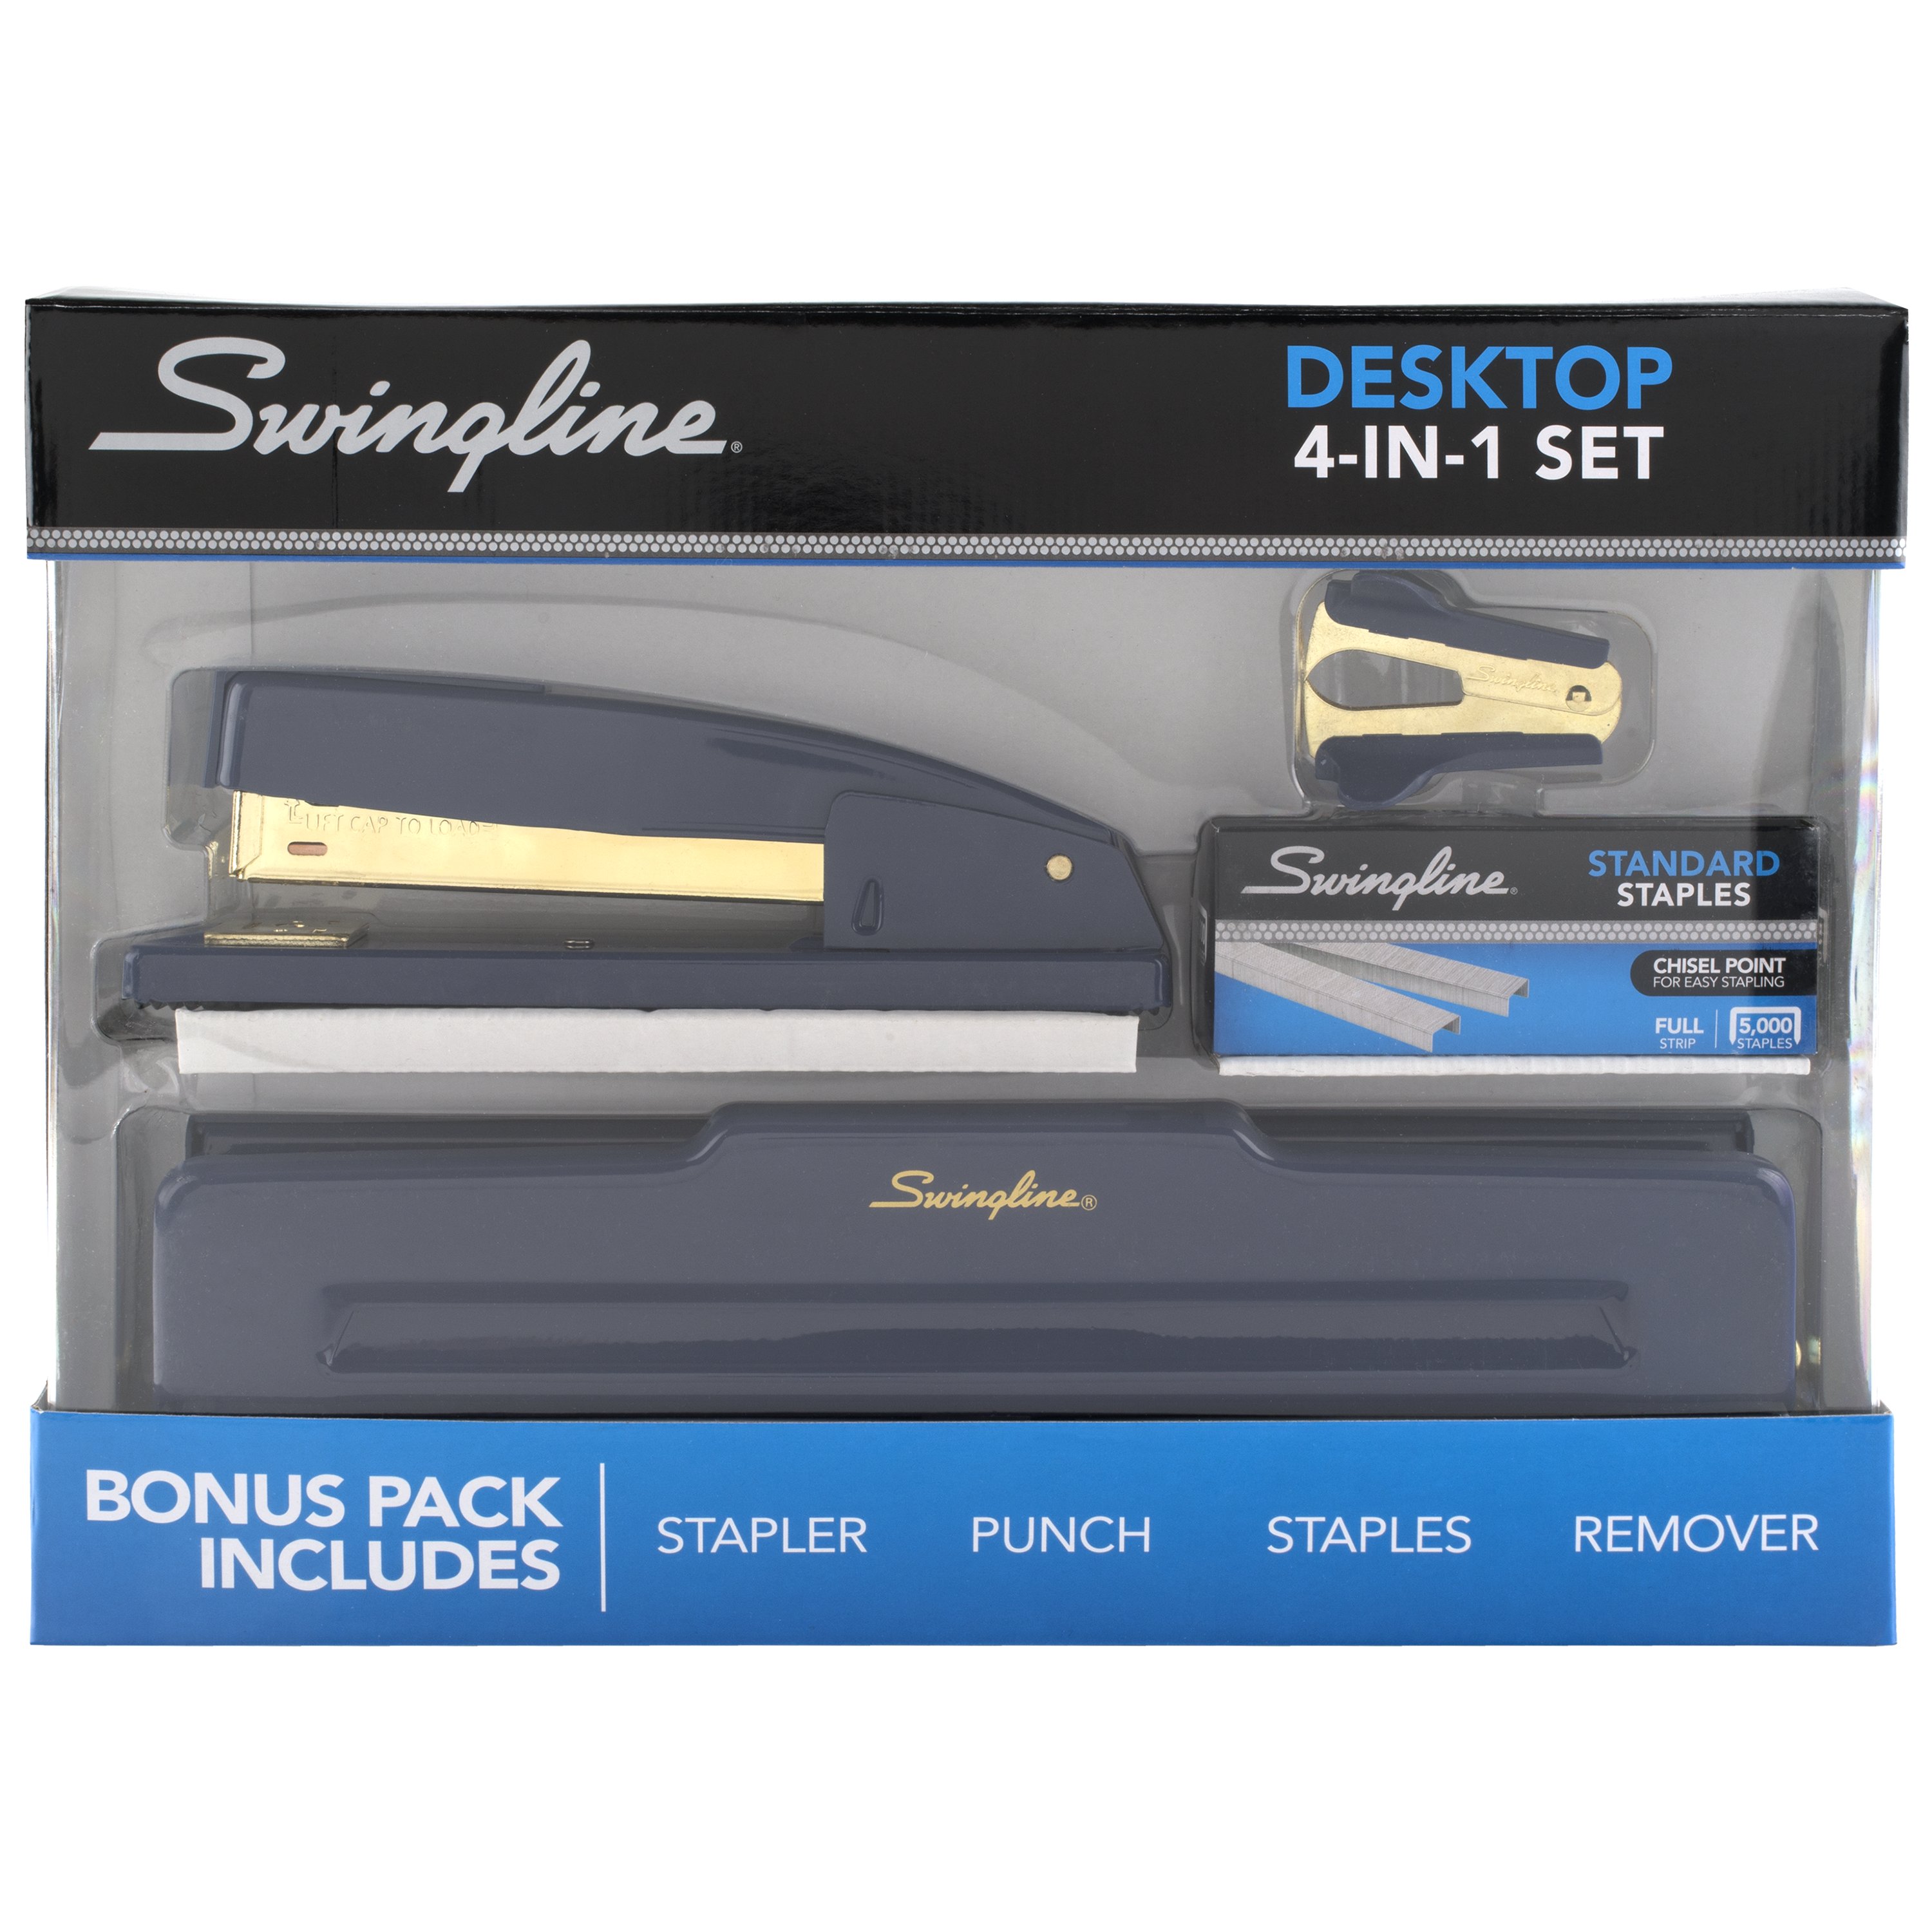 Swingline 444 Stapler Punch Kit, Navy and Gold (S7044405-WMT) - image 3 of 9